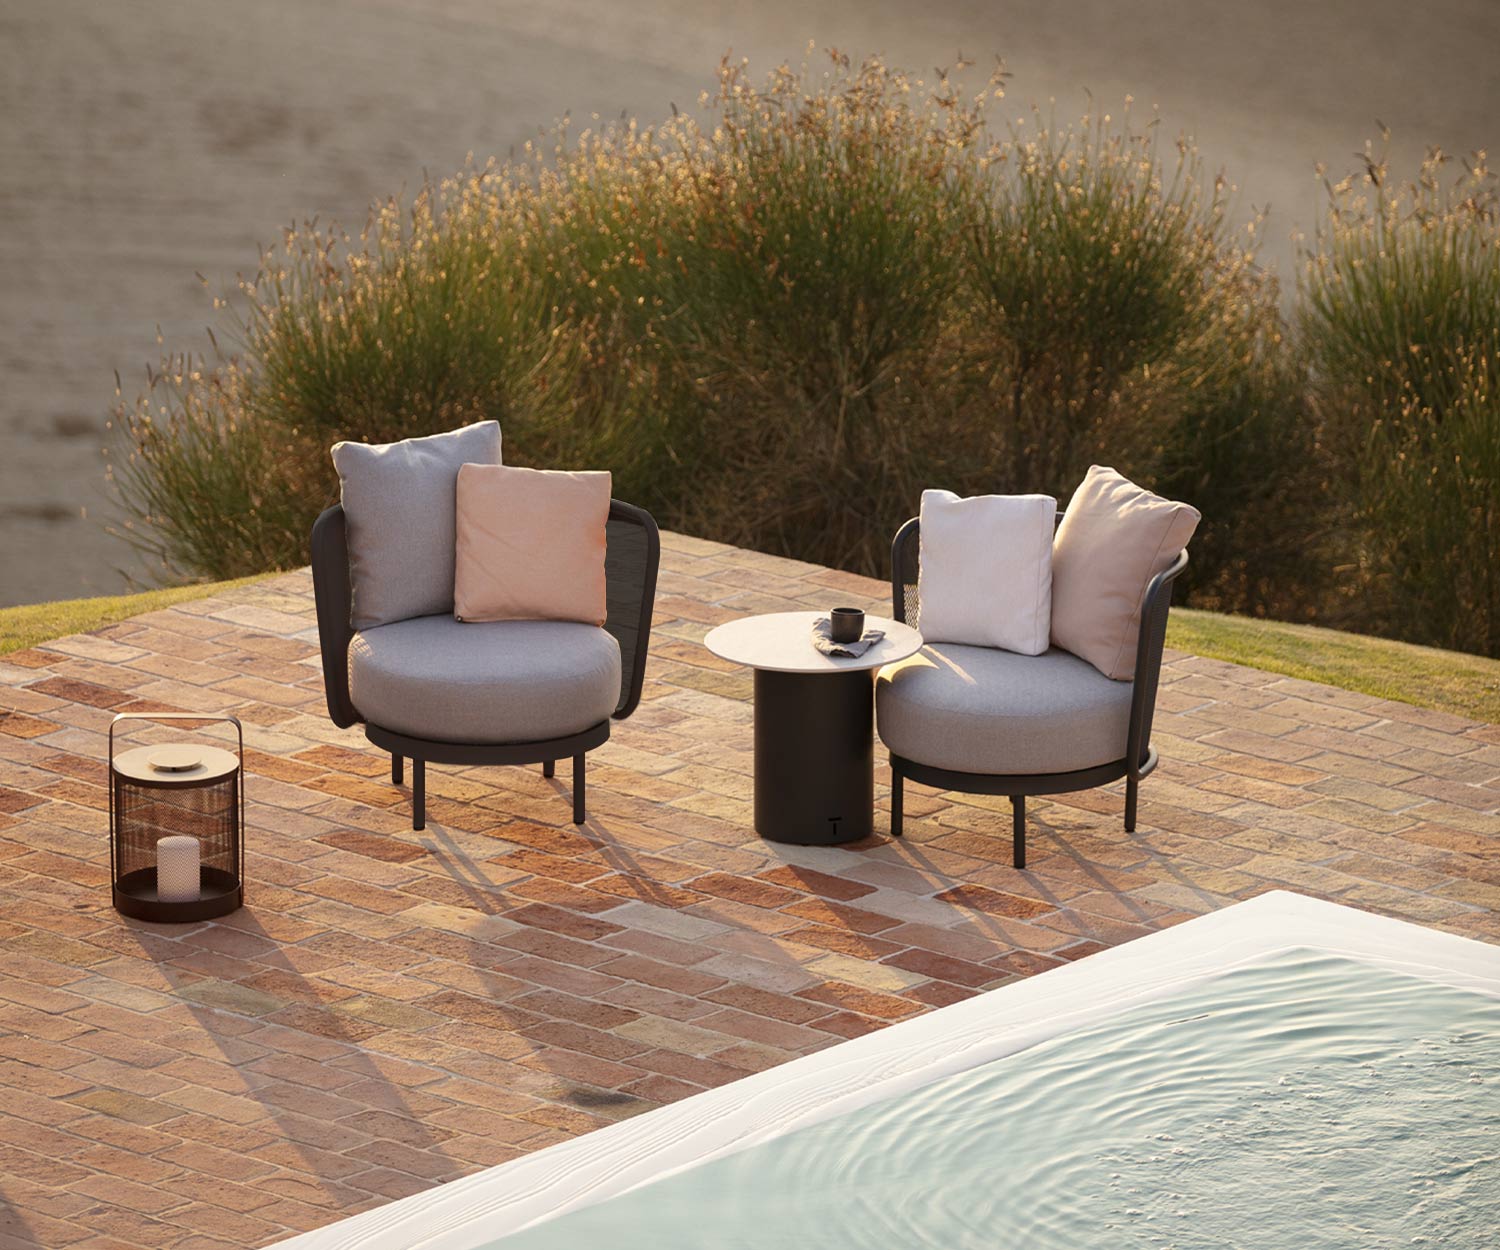 Exclusive Todus Baza Round Design club chair by the swimming pool